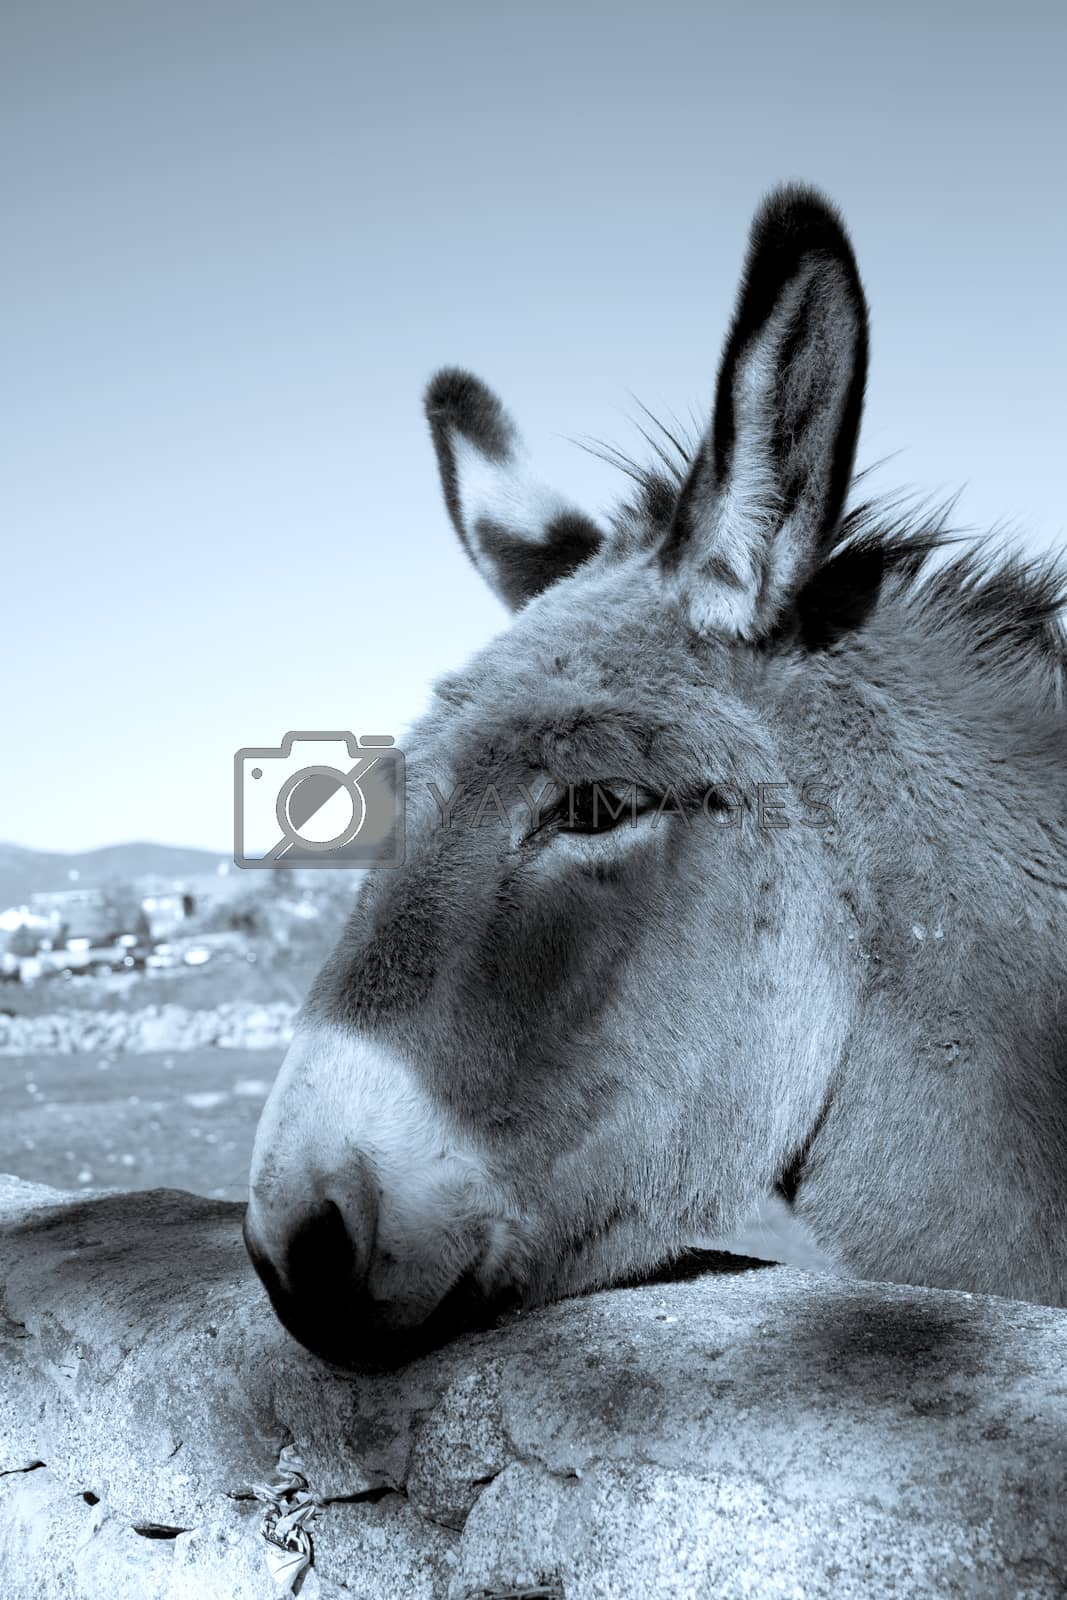 Royalty free image of Donkey in the field. Species in extinction by GemaIbarra